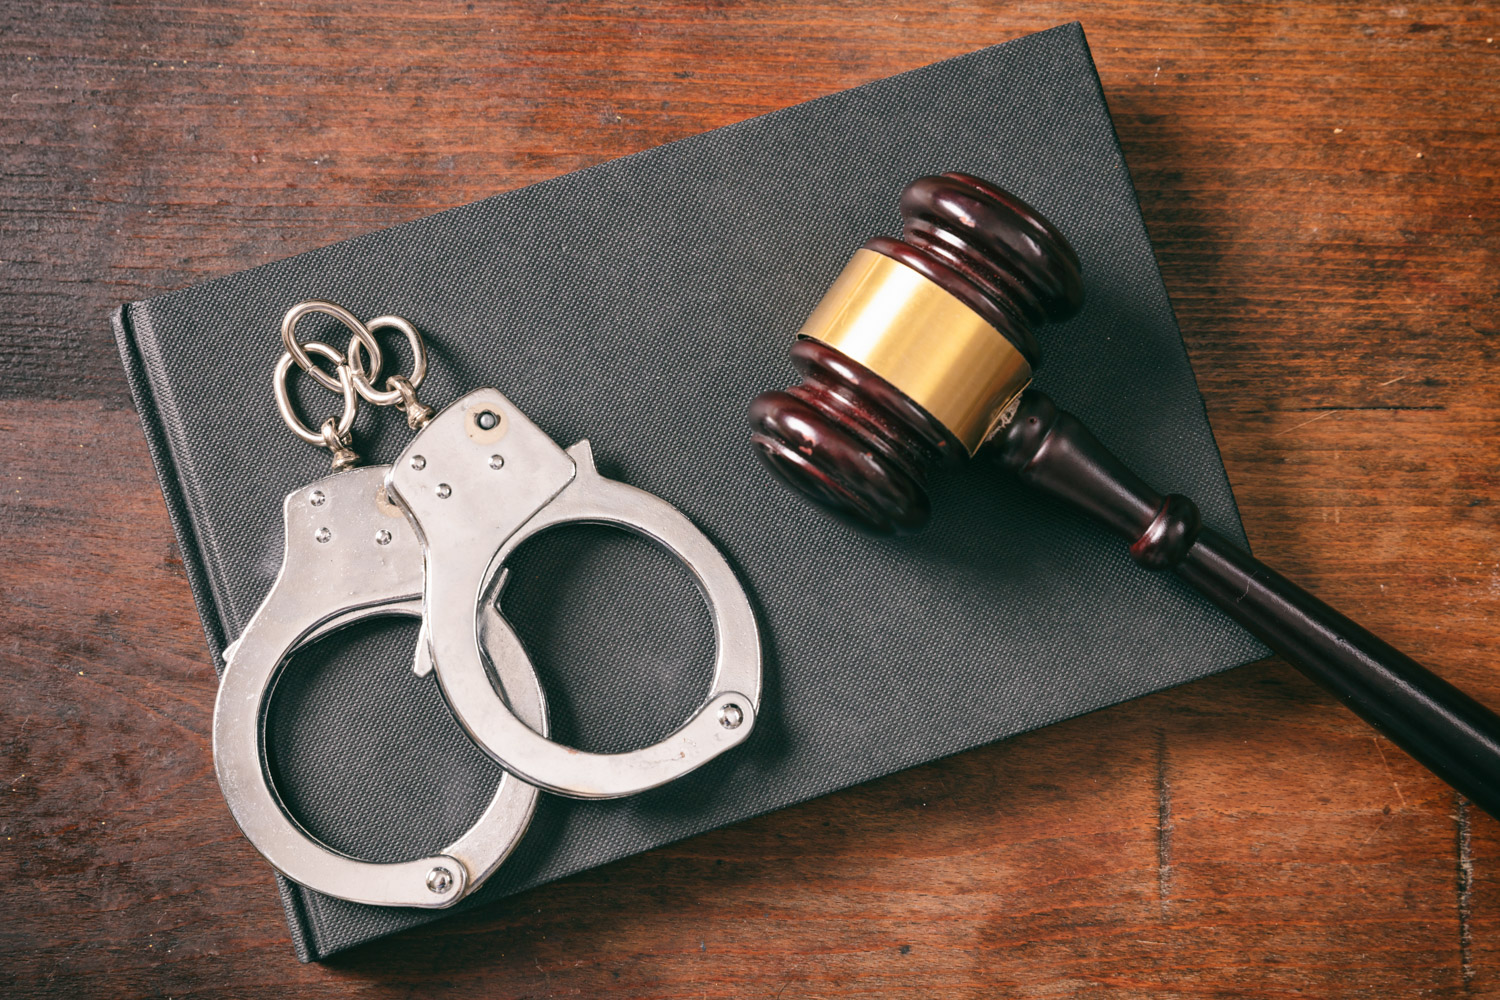 Do I qualify to seal or expunge my criminal record? Fort Lauderdale Criminal Defense Attorney explains